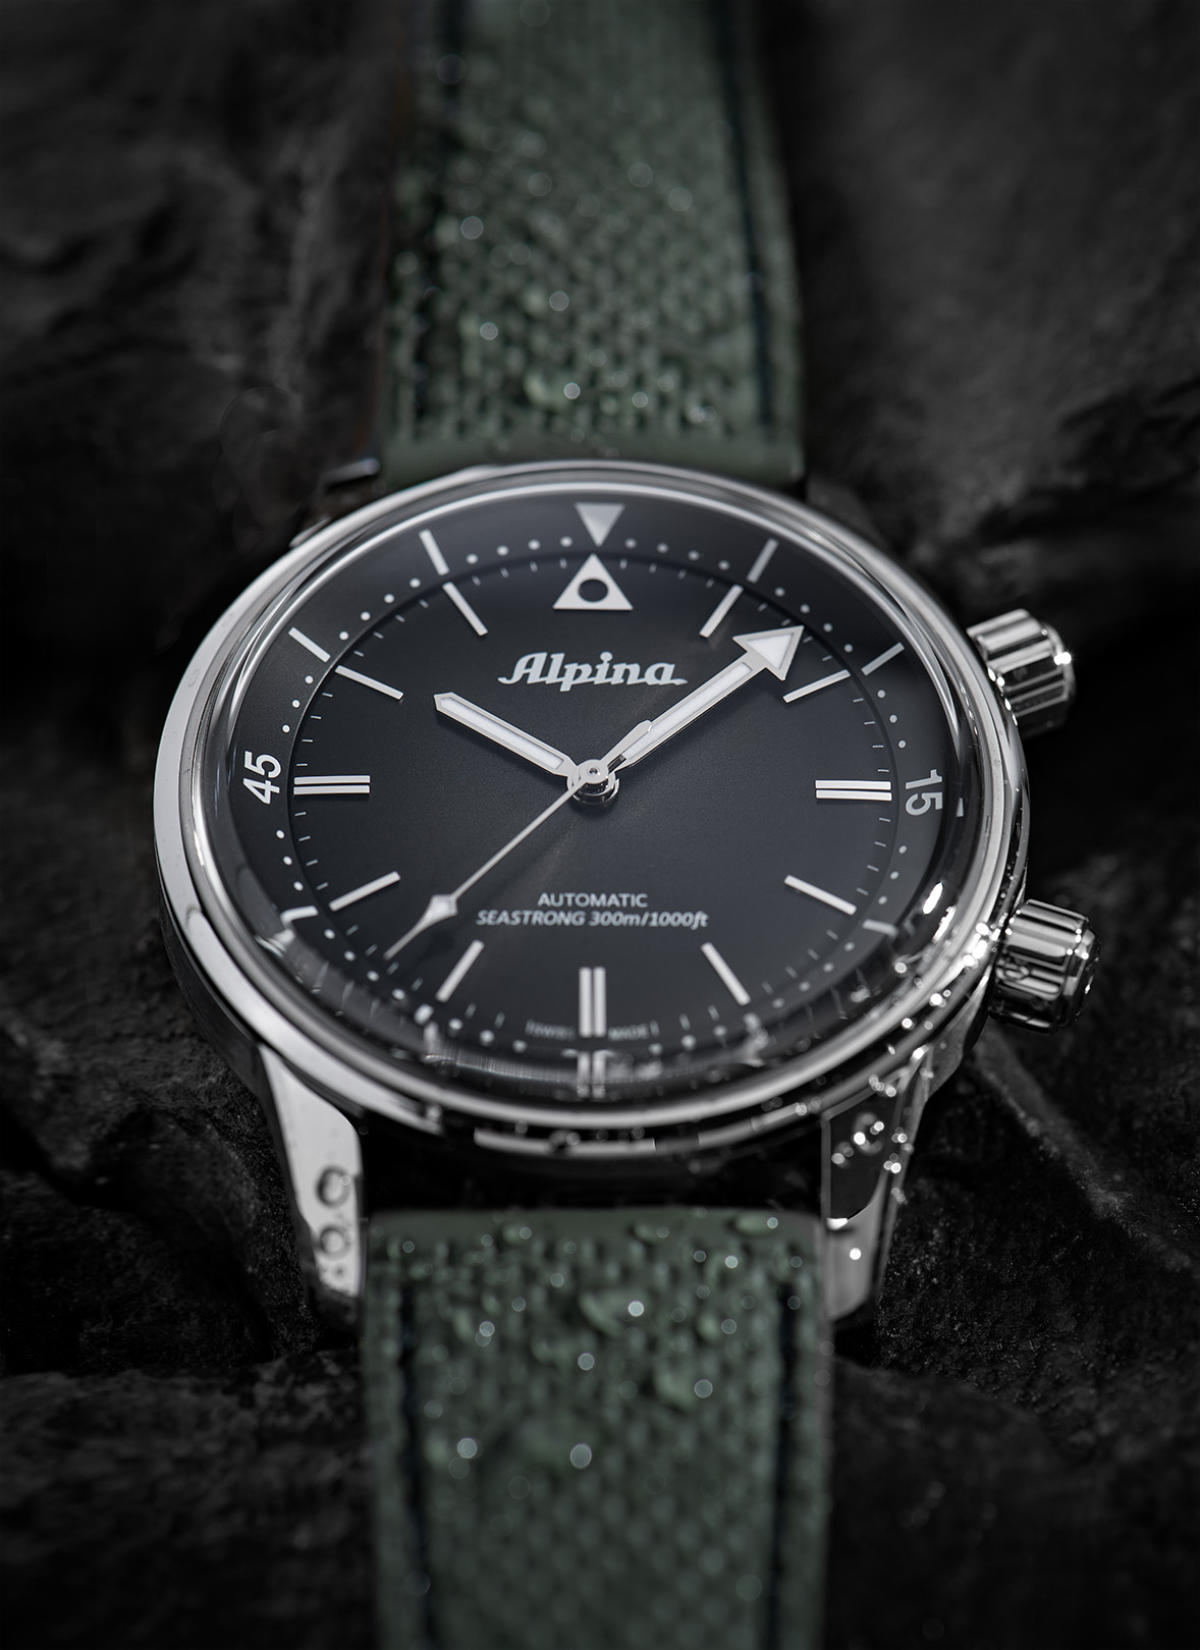 Seastrong Diver 300 Heritage: Brand-New Colours For The Iconic Alpina Diving Watch